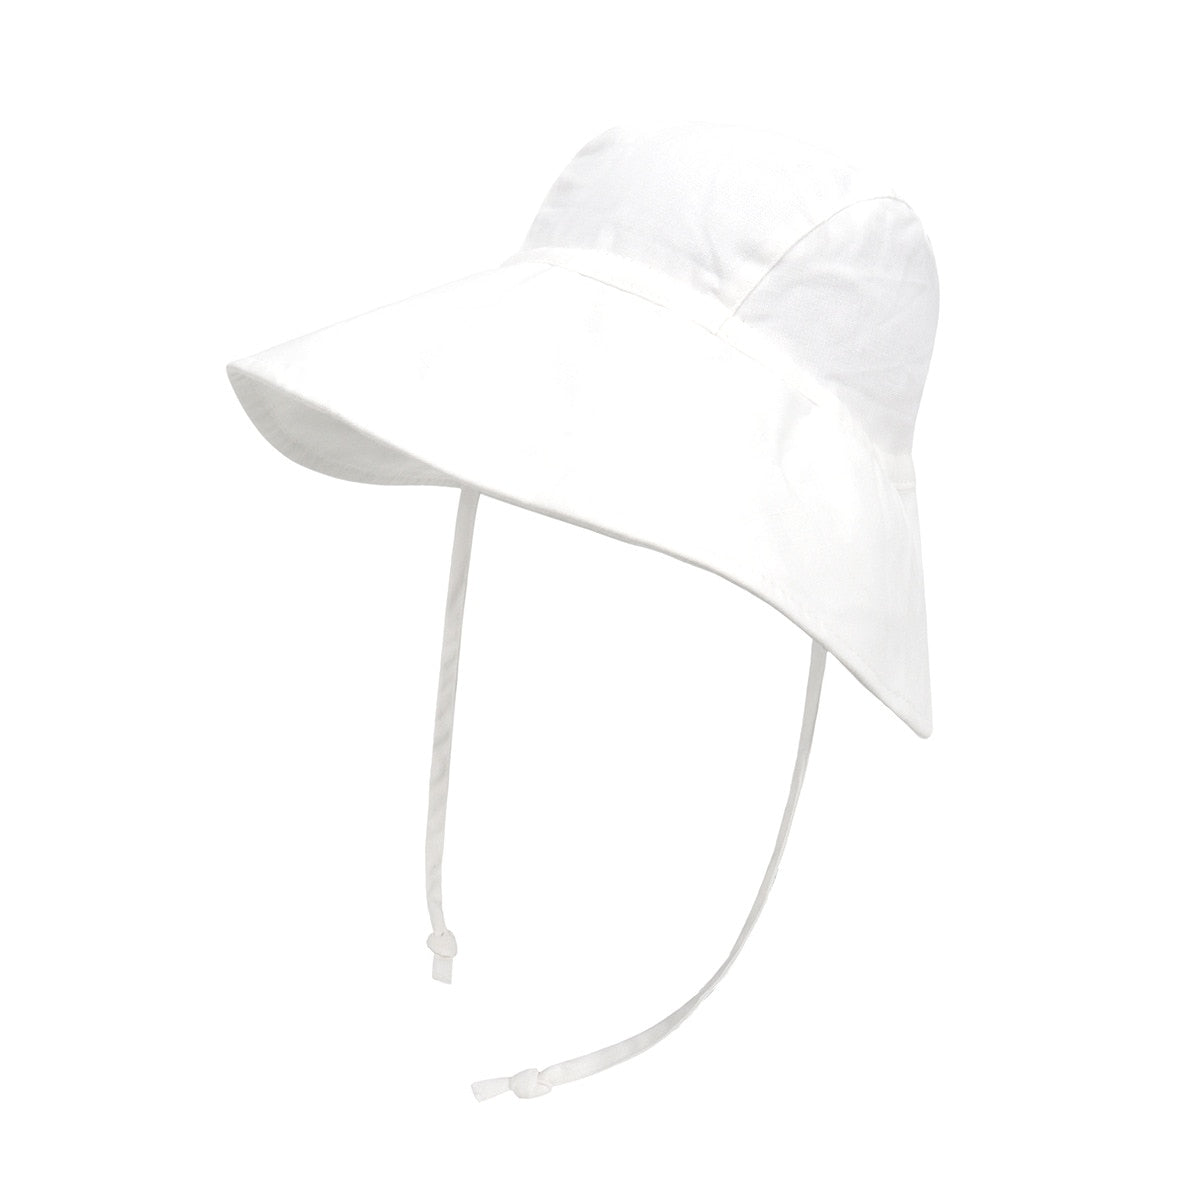 Big Brim Baby and Toddler Sun Hat | Sun Protection with a Solid Design itsykitschycoo